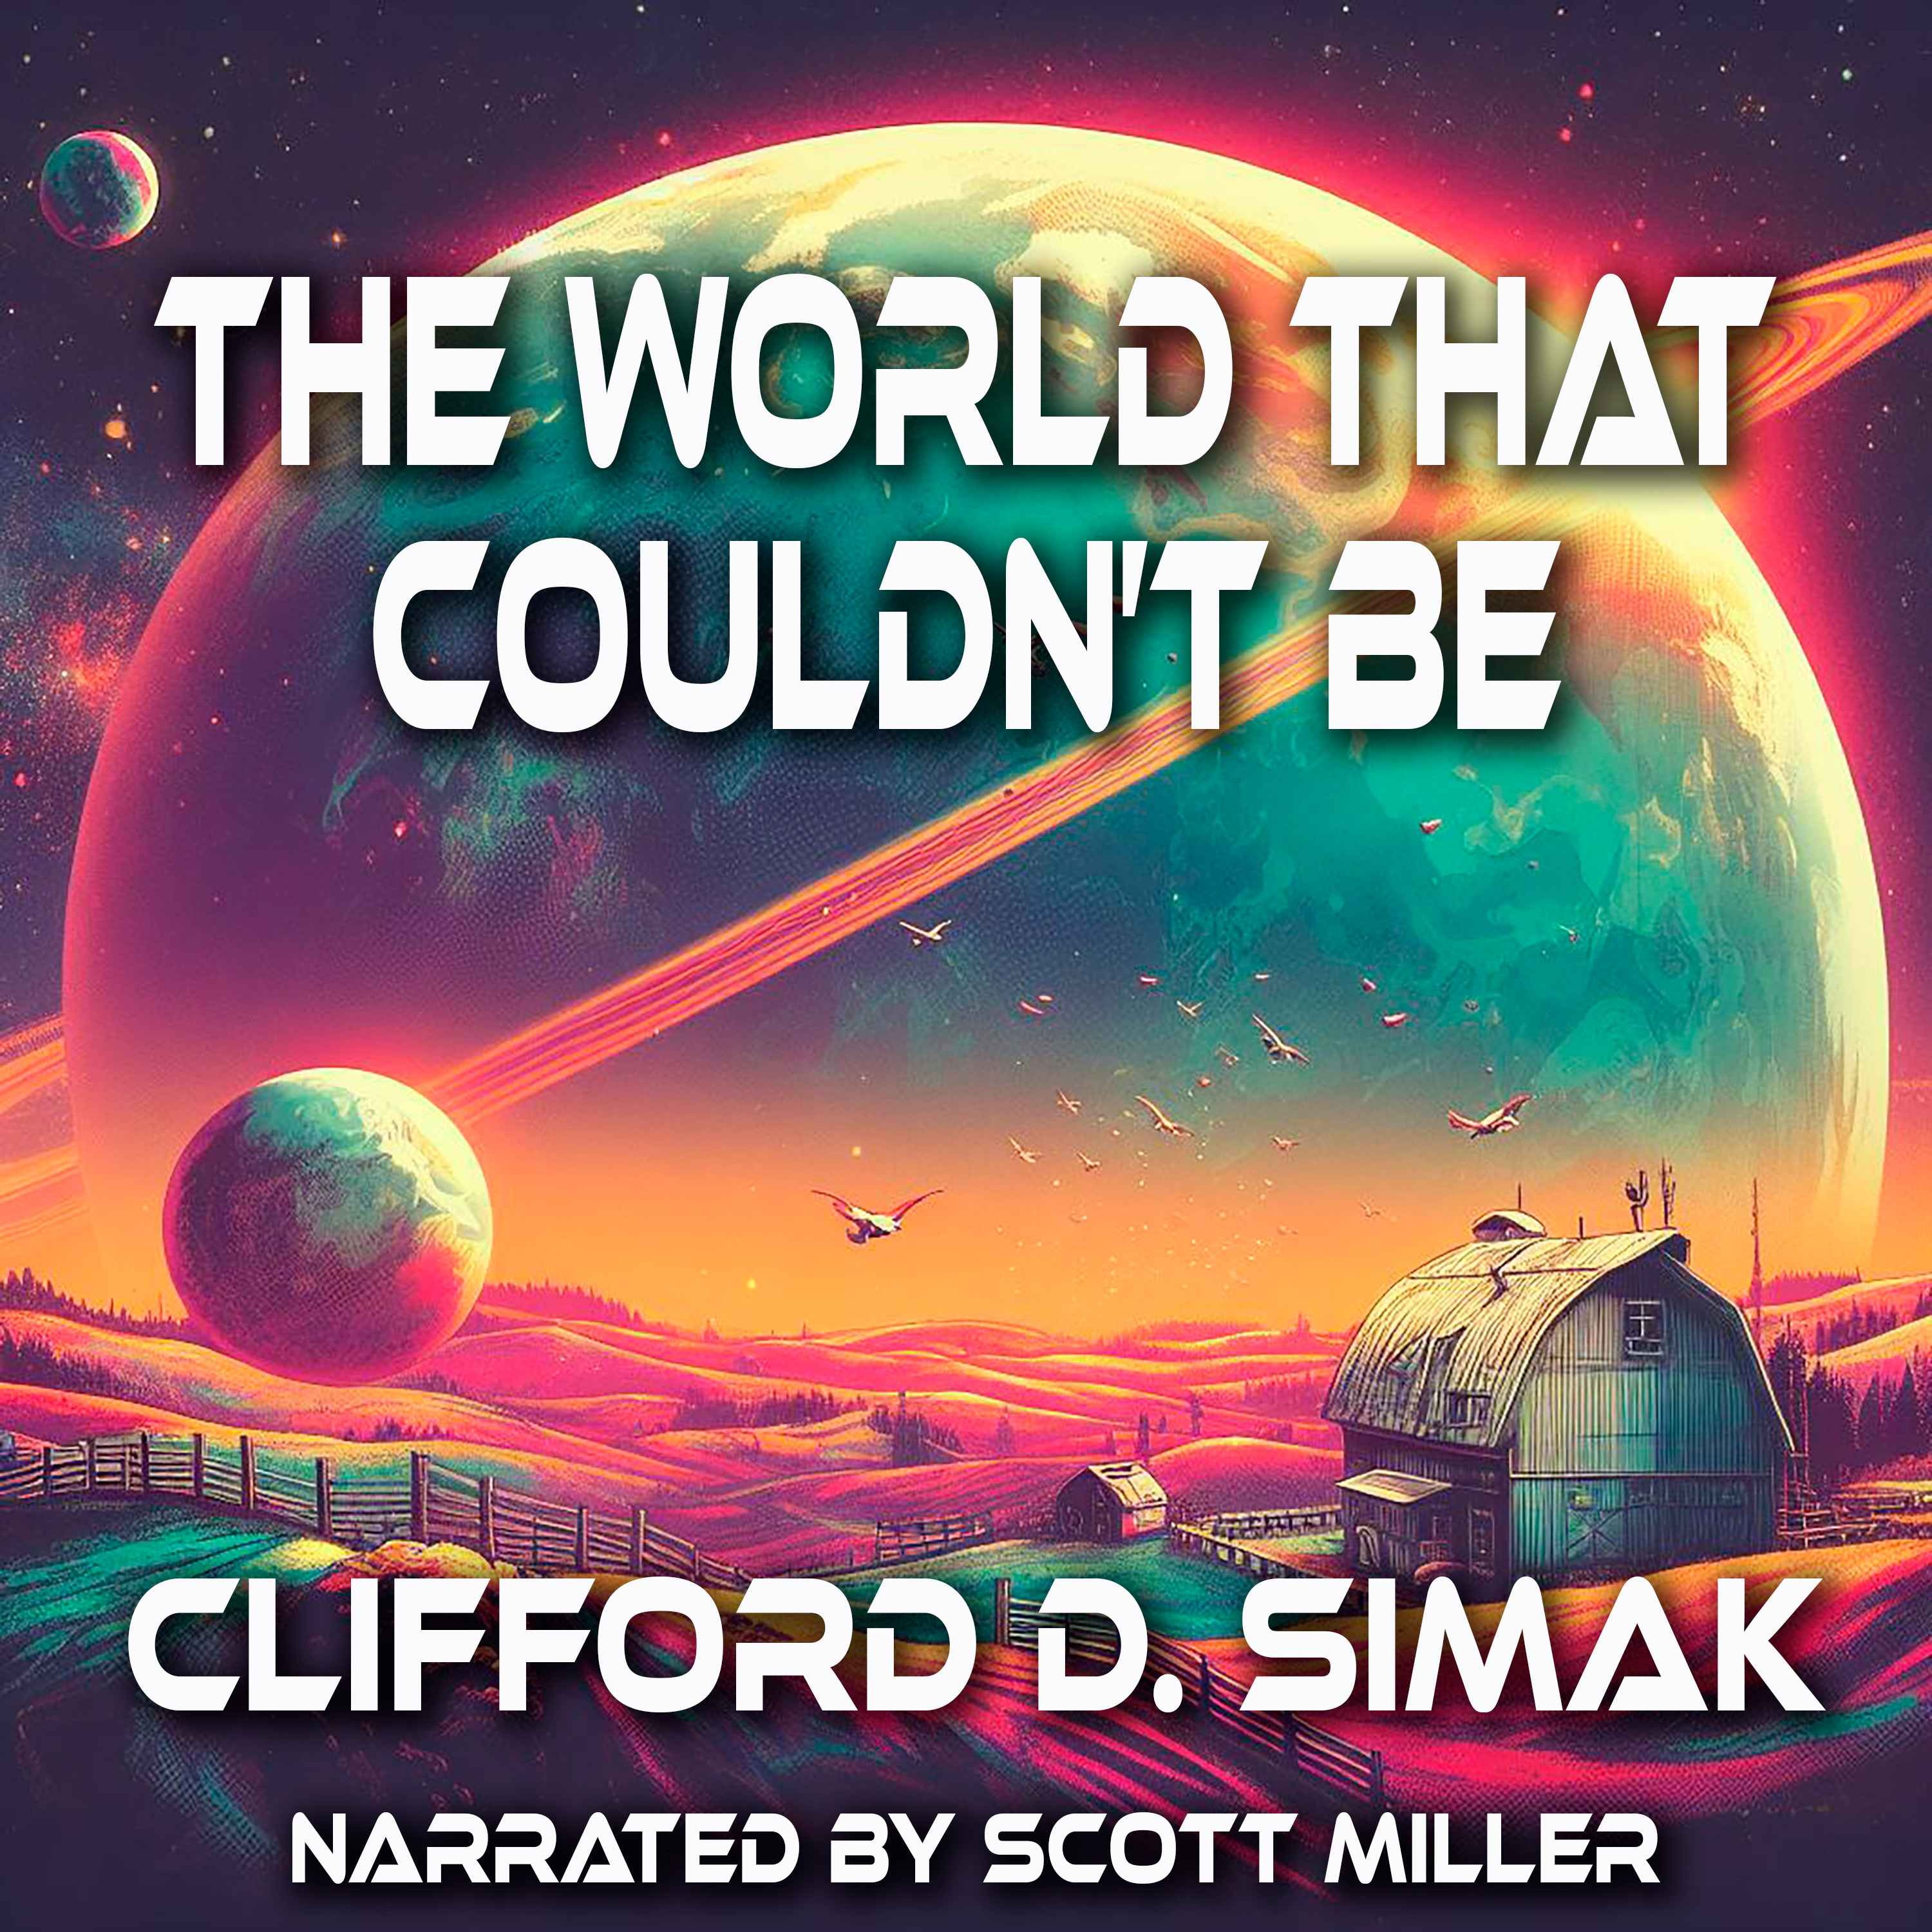 The World That Couldn’t Be by Clifford D. Simak - Clifford D. Simak Short Stories